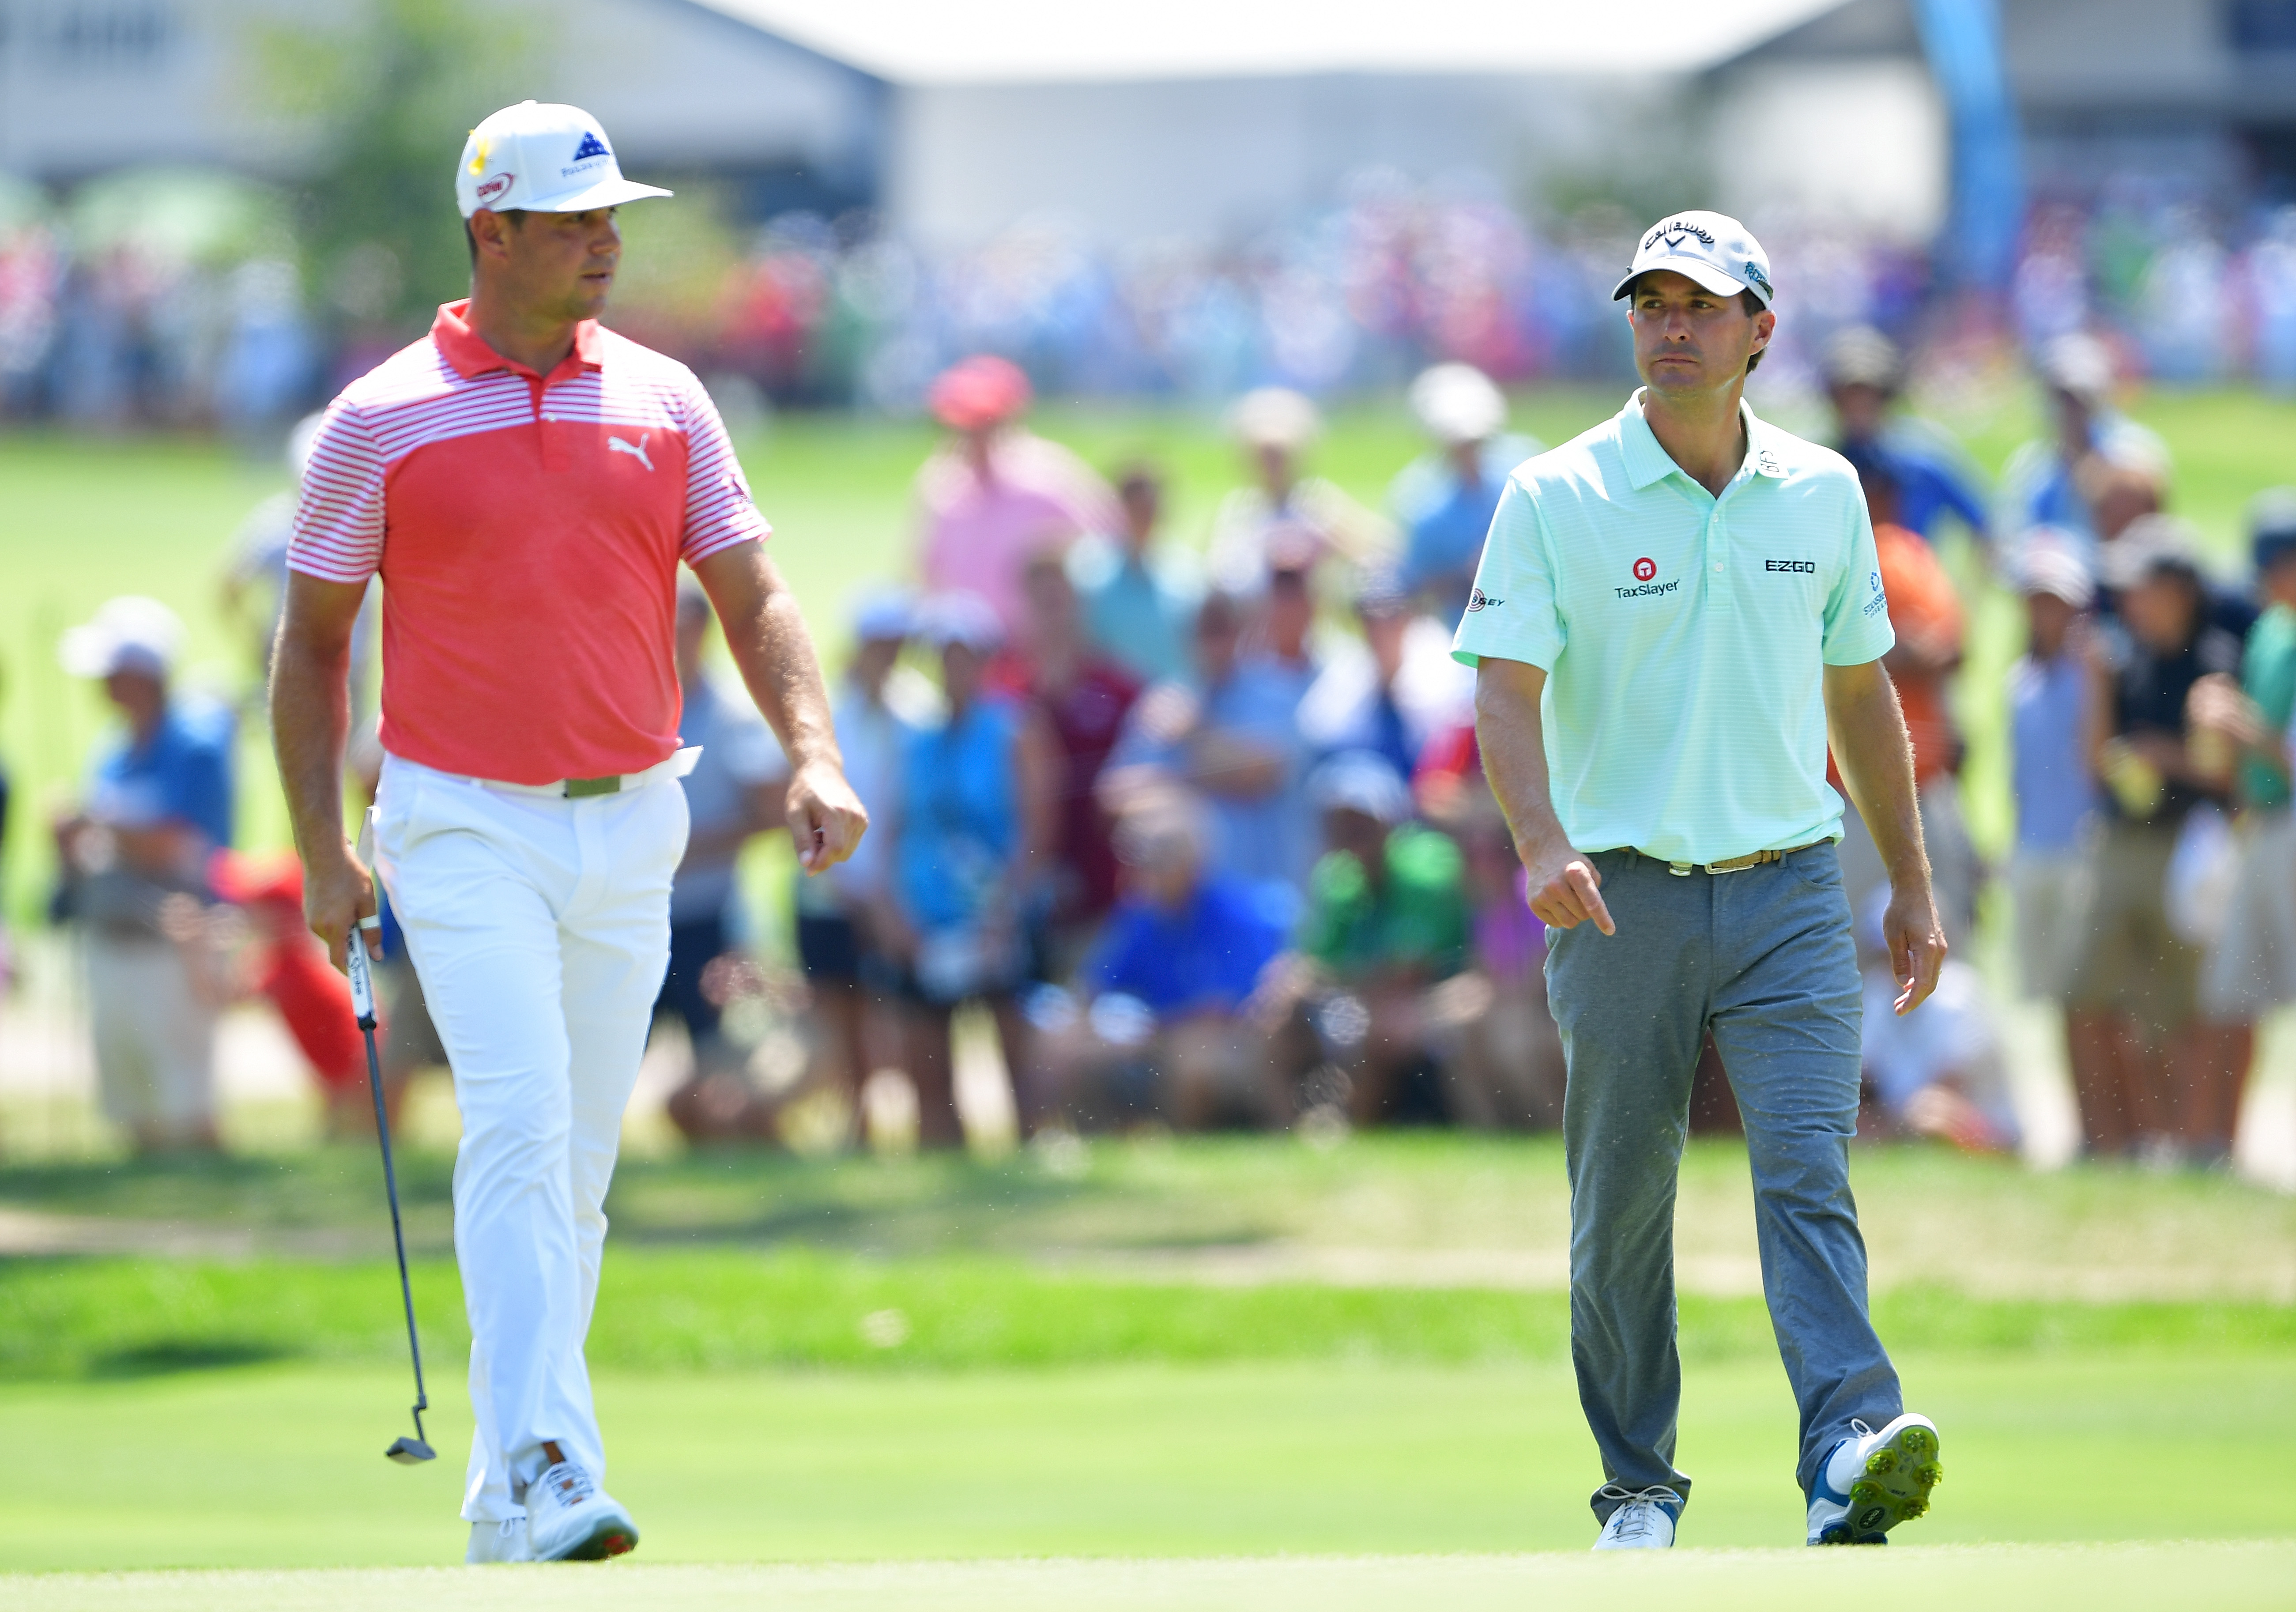 Gary Woodland and Kevin Kisner were paired together and torched Bellerive together